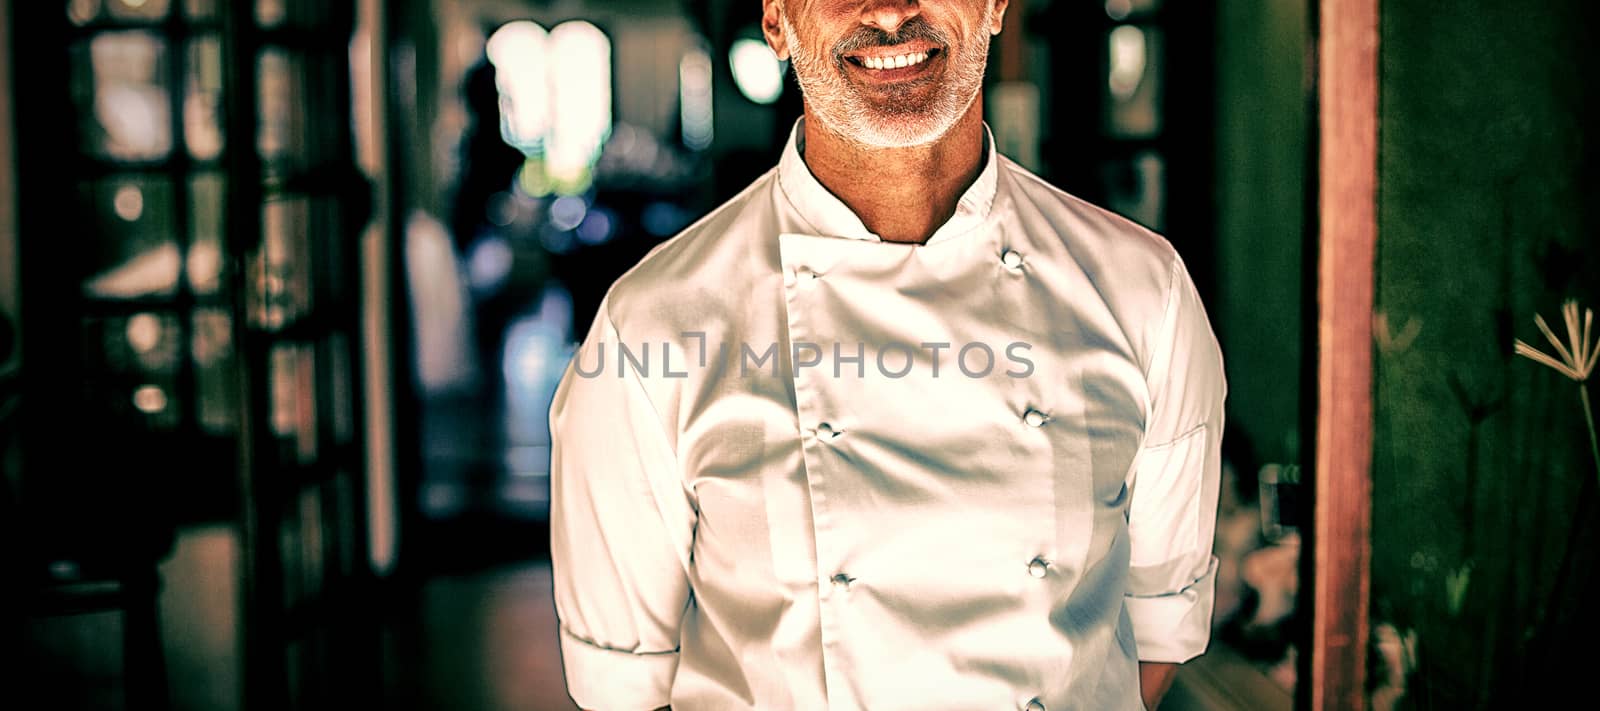 Portrait of chef standing with hands behind back in restaurant